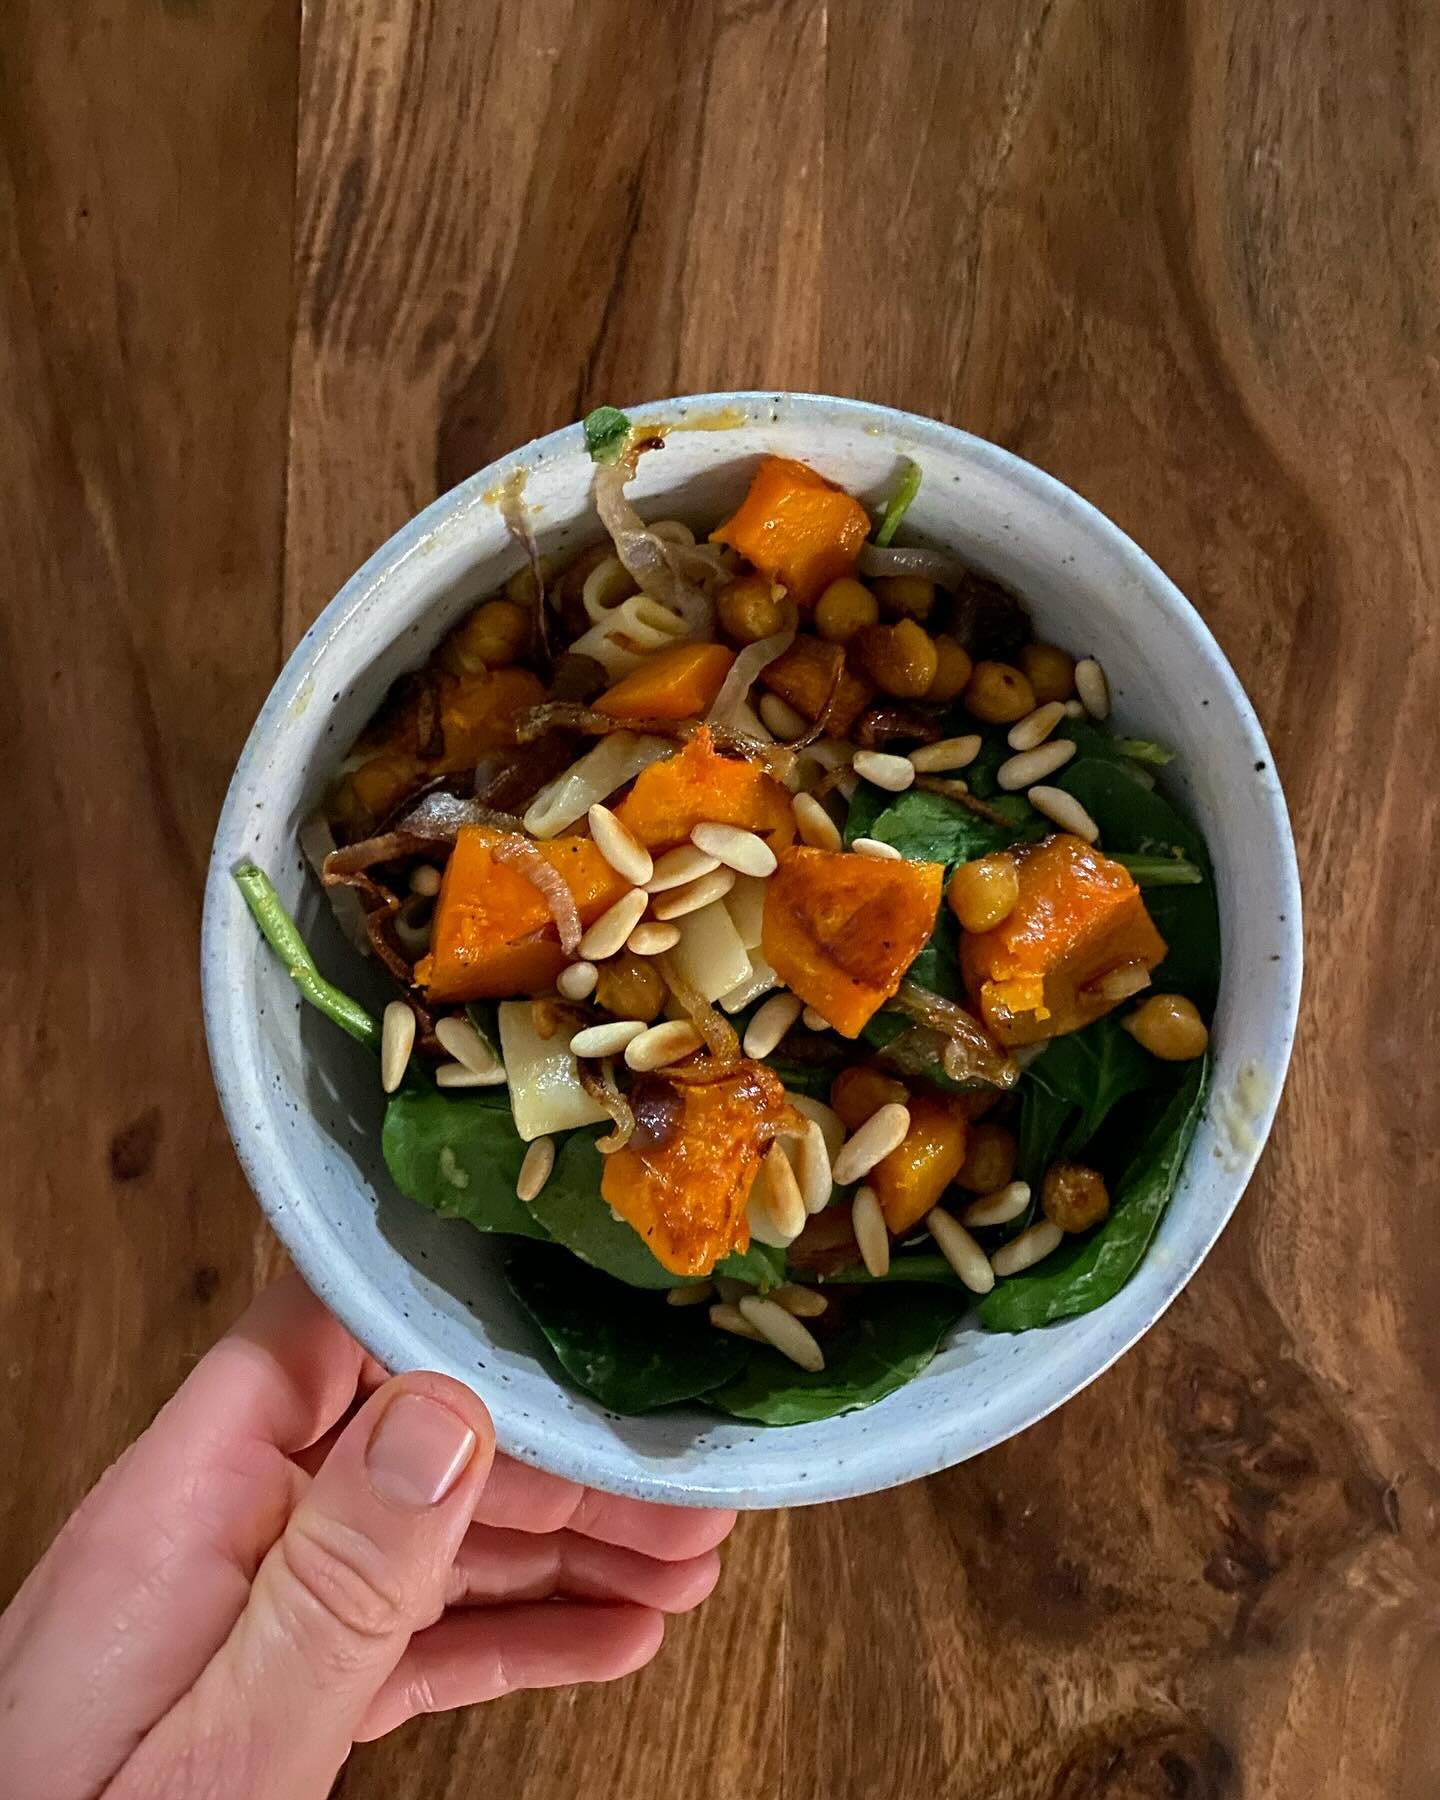 RECIPE - Pumpkin and chickpea pasta

I shared this meal on my stories last week and so many of you asked for the recipe so here it is! This is one of our favourite mid week dinners. It&rsquo;s easy to make and packs in lots of protein and fibre. It&r